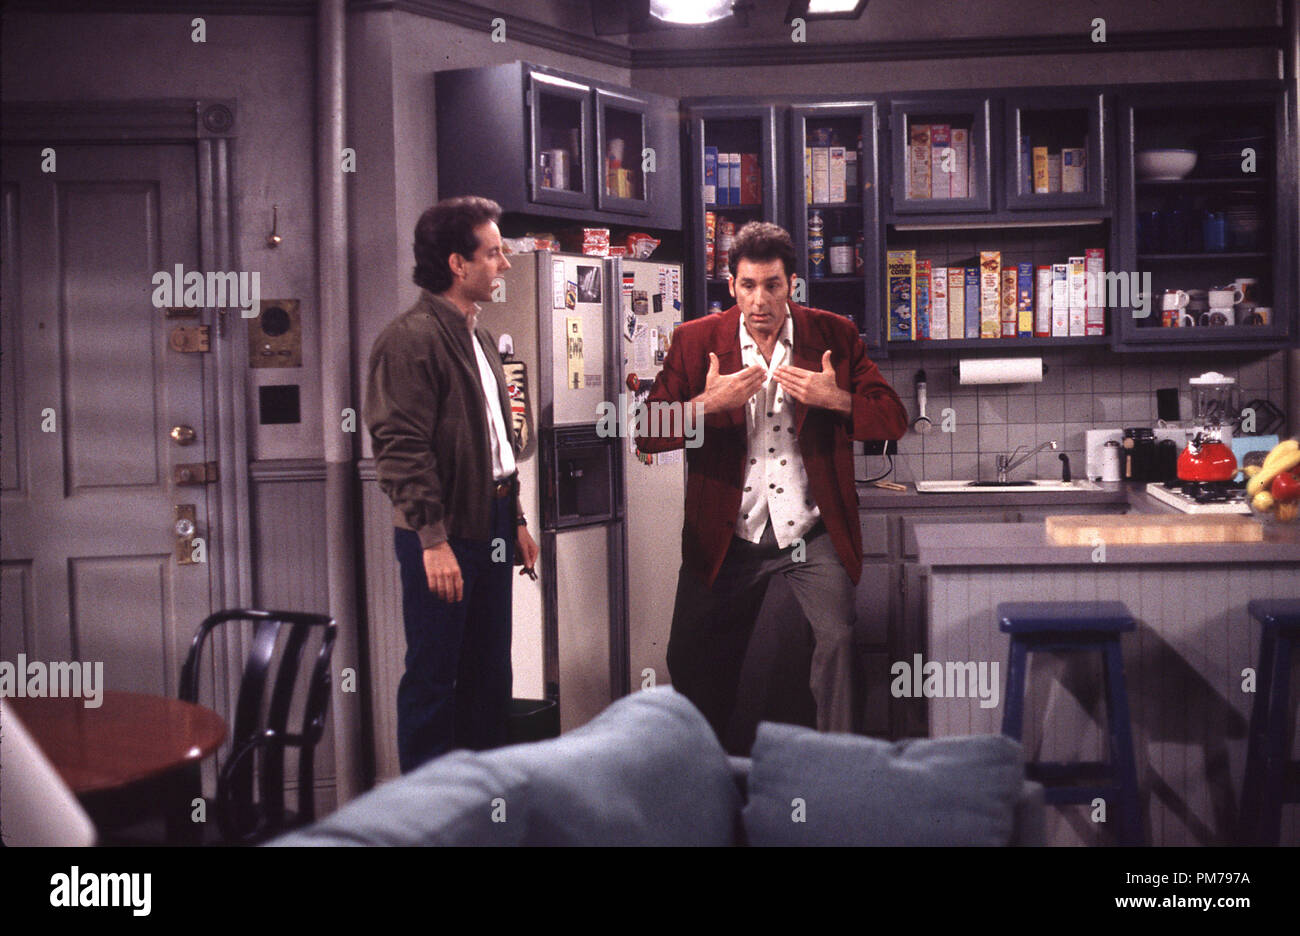 Film Still from 'Seinfeld' Jerry Seinfeld, Michael Richards 1996 Photo Credit: Joey Delvalle   File Reference # 31042269THA  For Editorial Use Only - All Rights Reserved Stock Photo